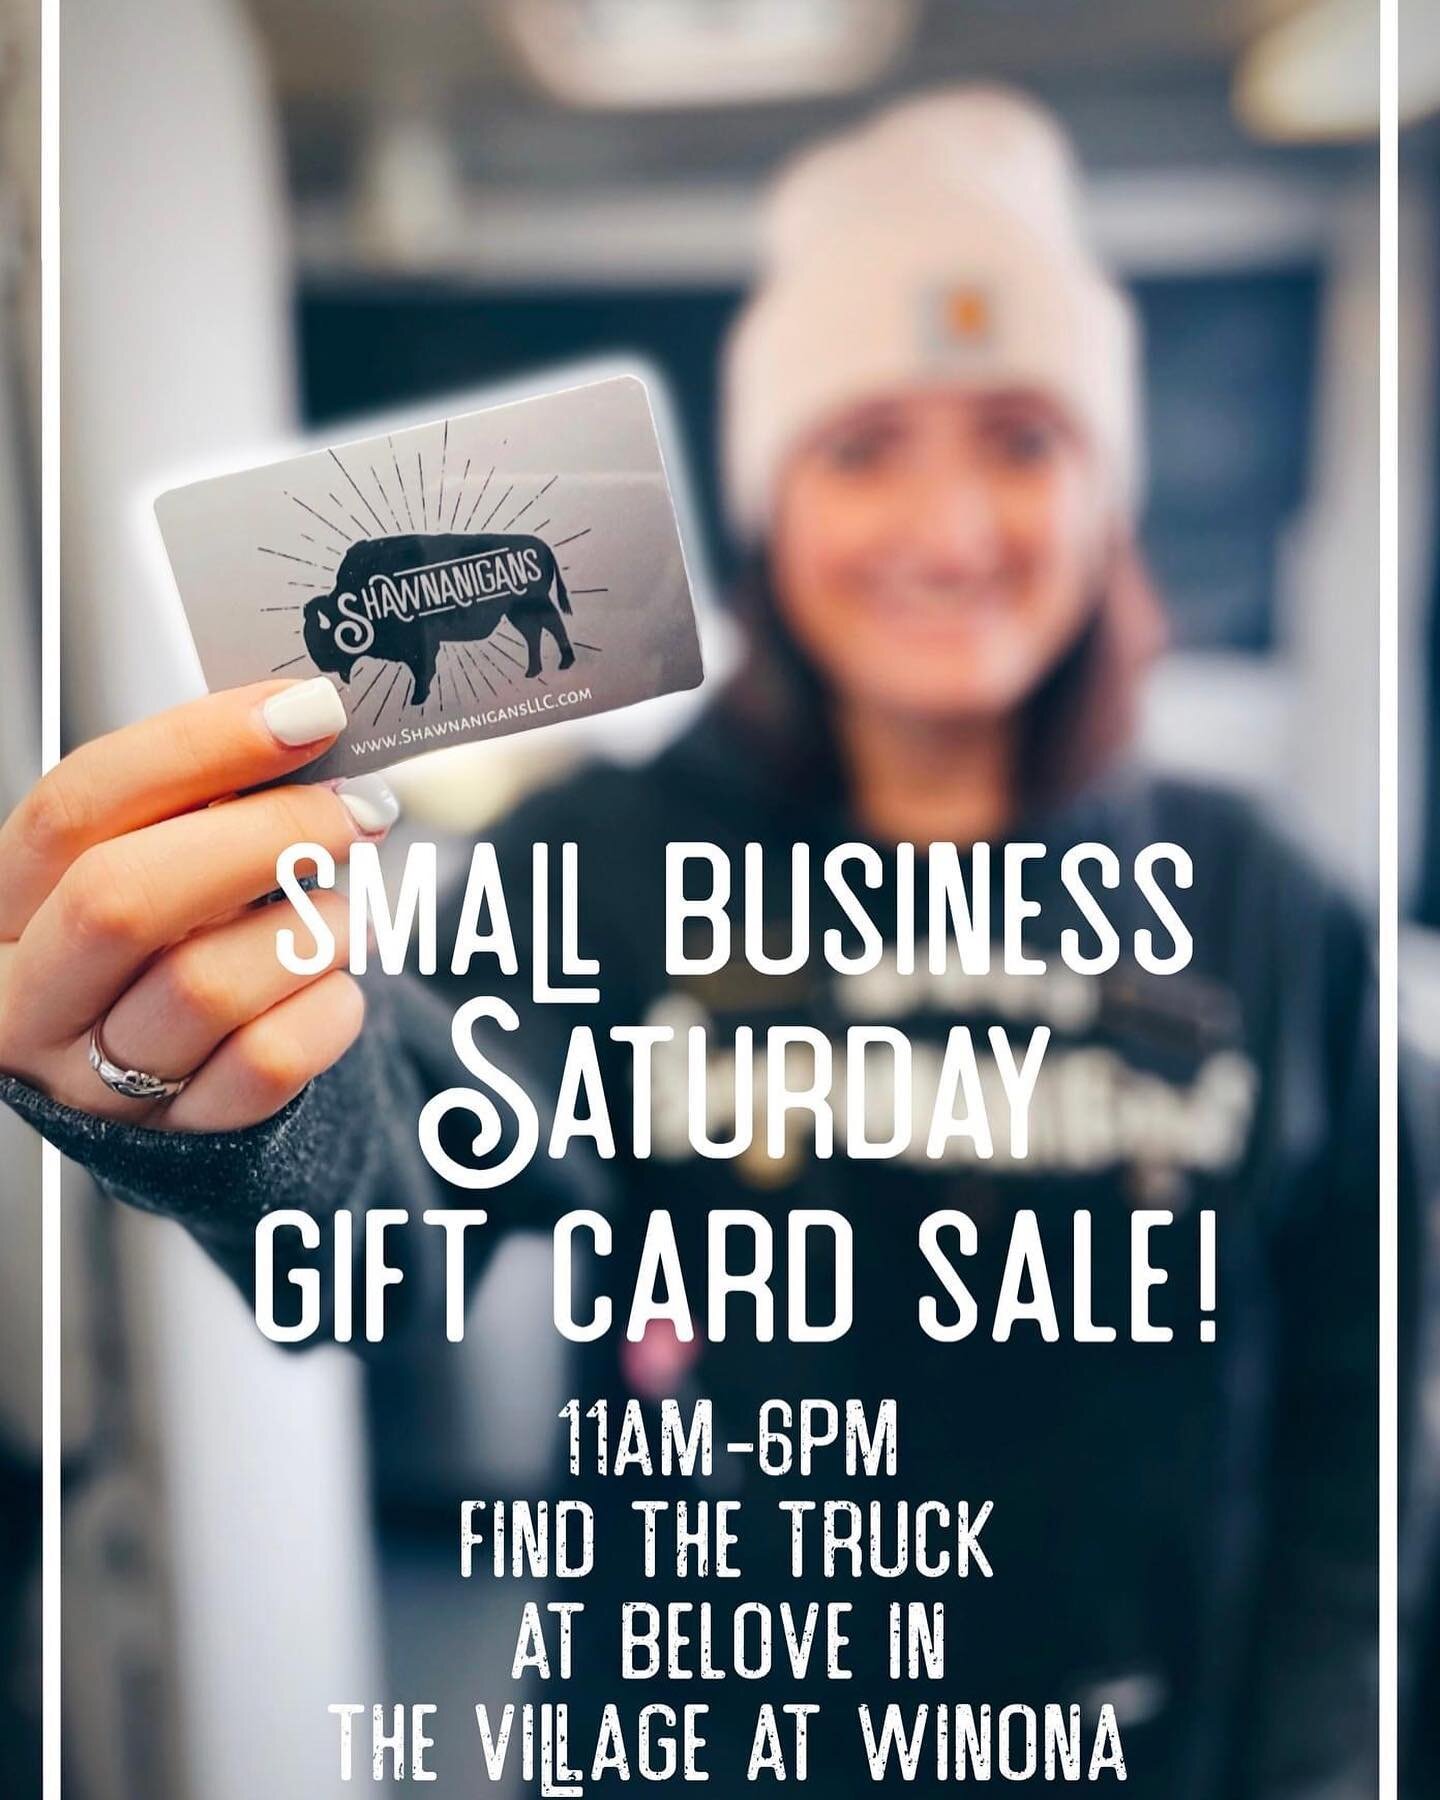 Good morning! Happy Small Business Saturday!!!

We hope that you're taking today to shop local at the wonderful small businesses we have here in Kosciusko County. There's great shops and sales going on in the Village At Winona today which is where yo